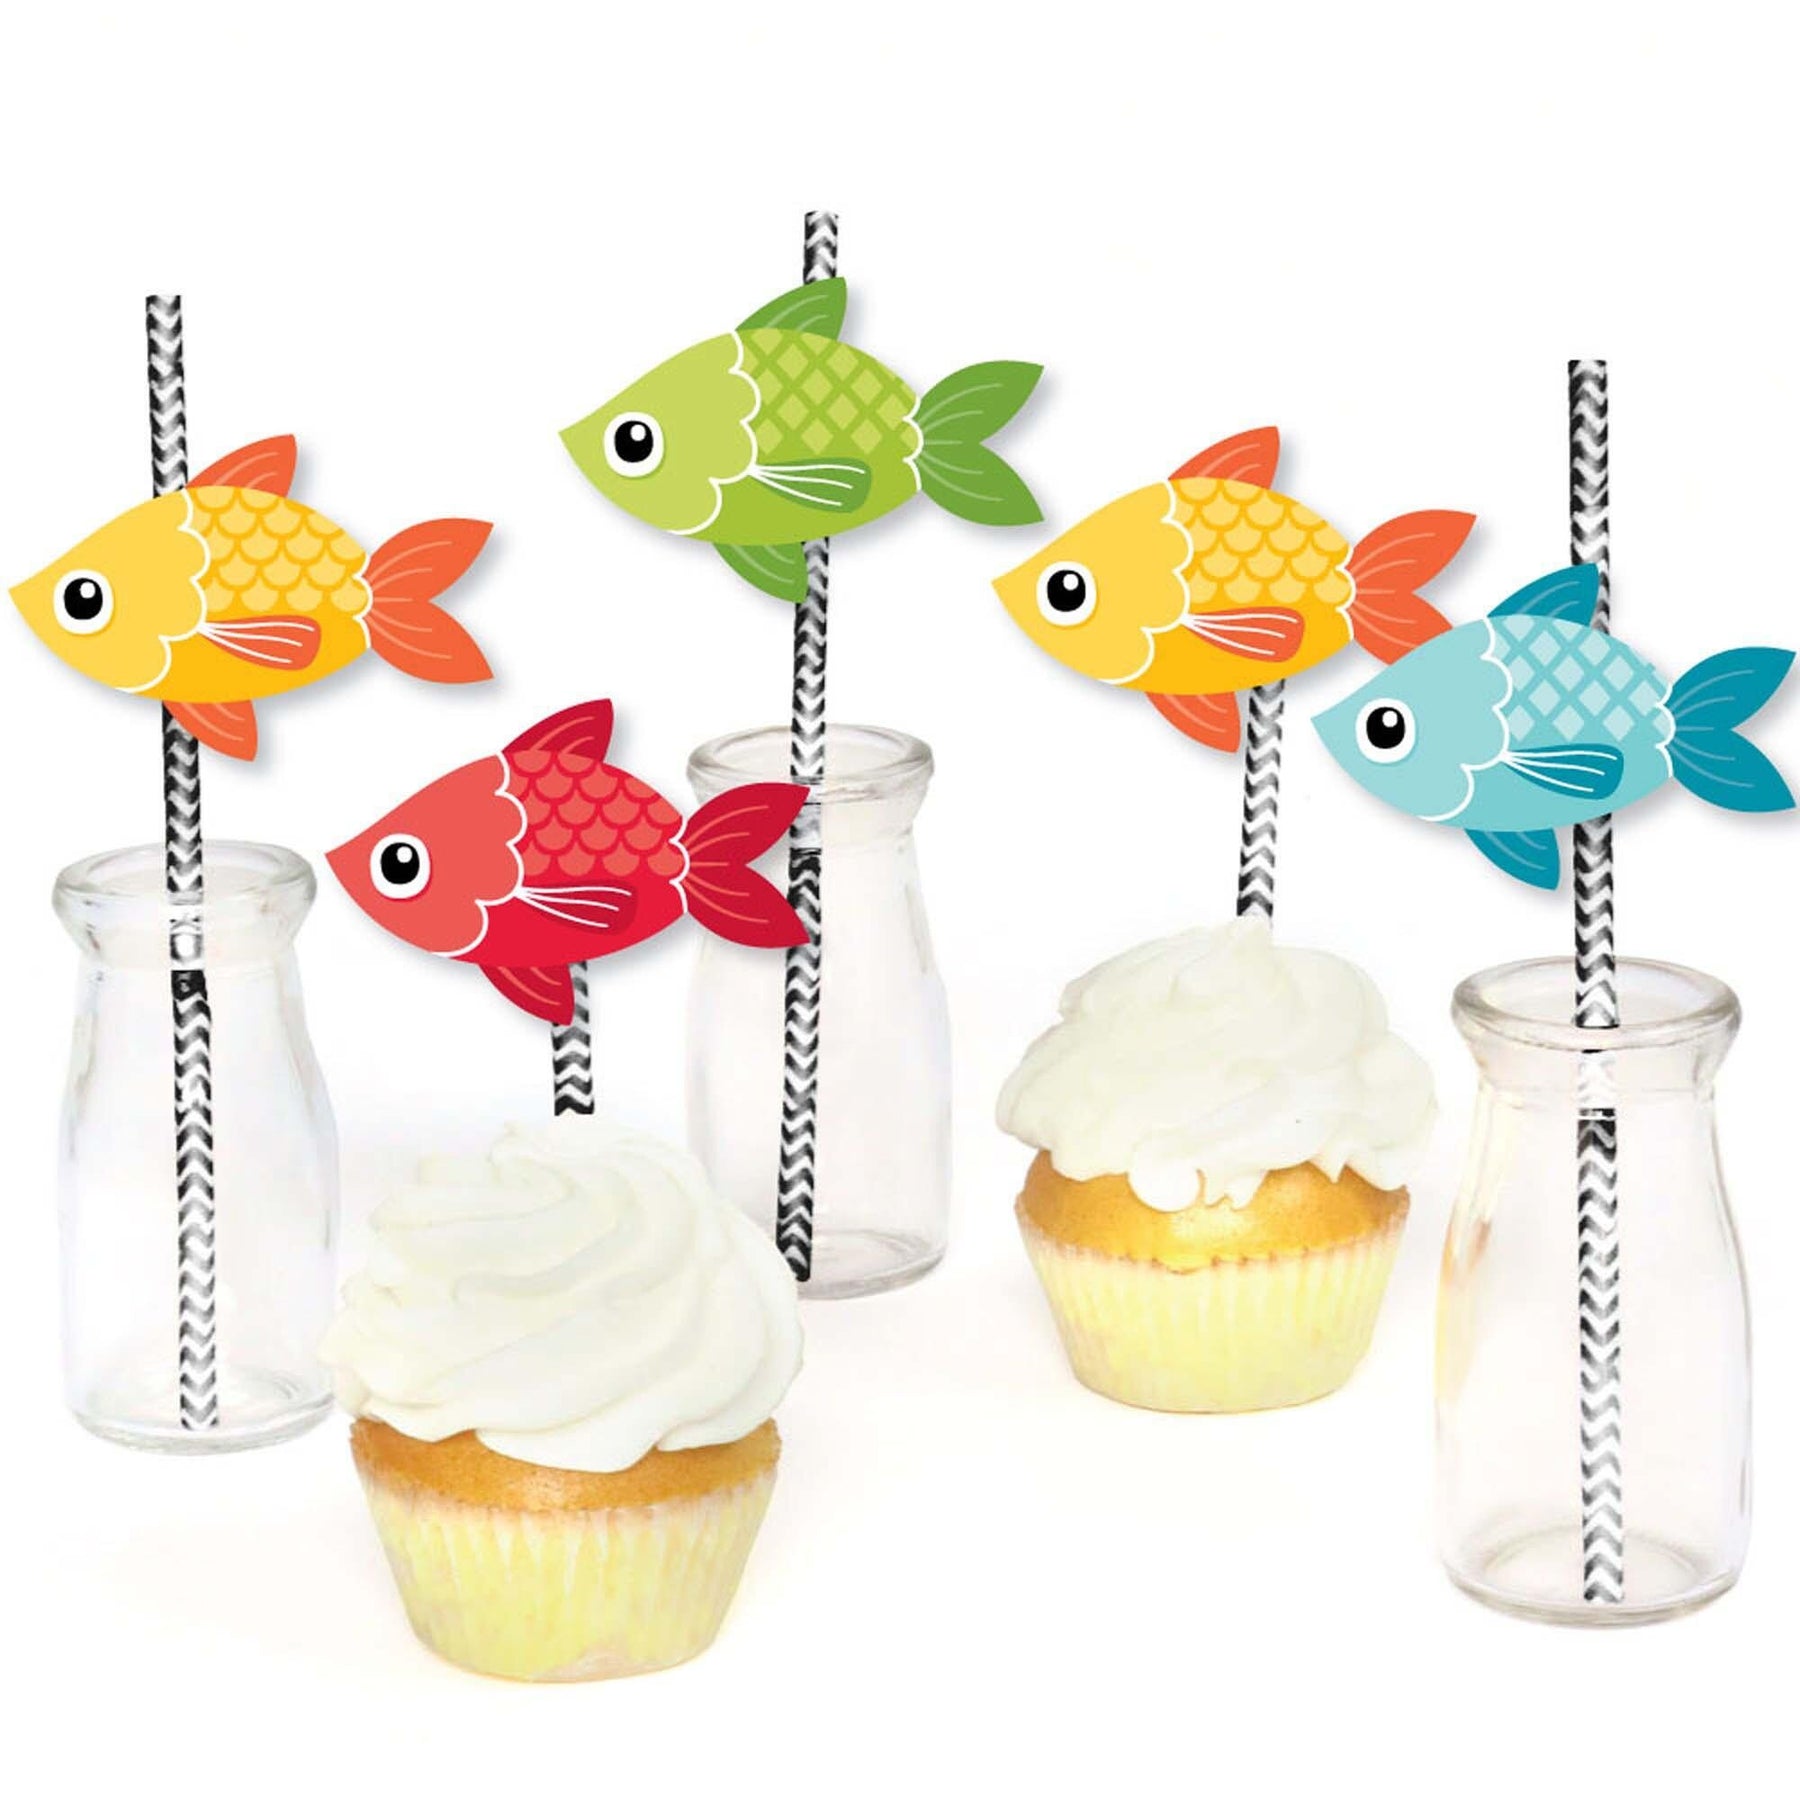 Let's Go Fishing - Paper Straw Decor - Fish Themed Party or